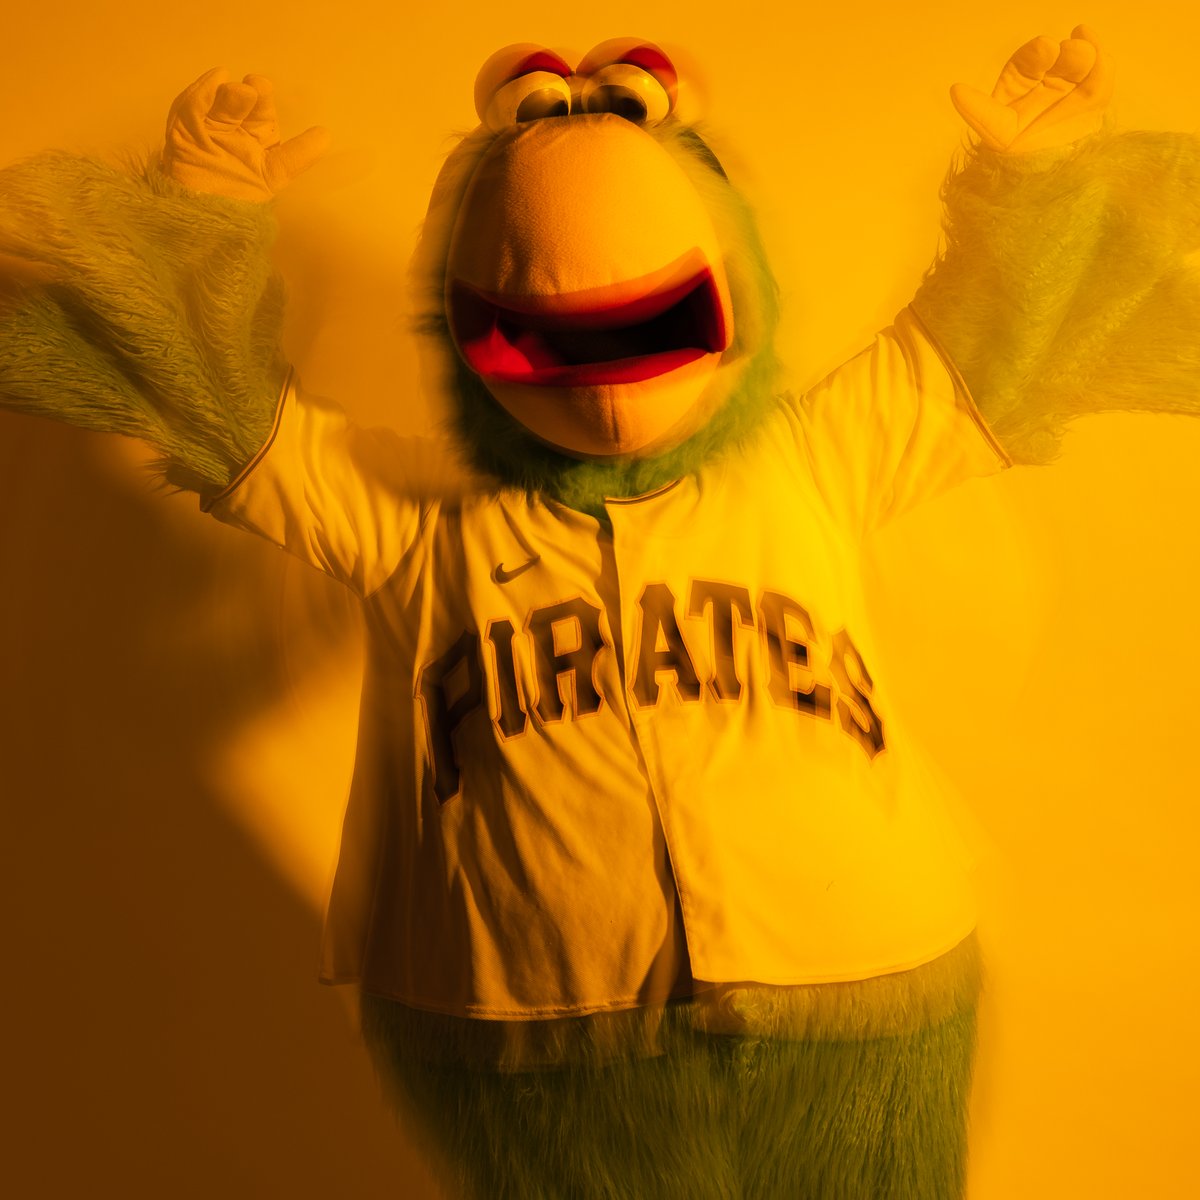 Pirate_Parrot tweet picture